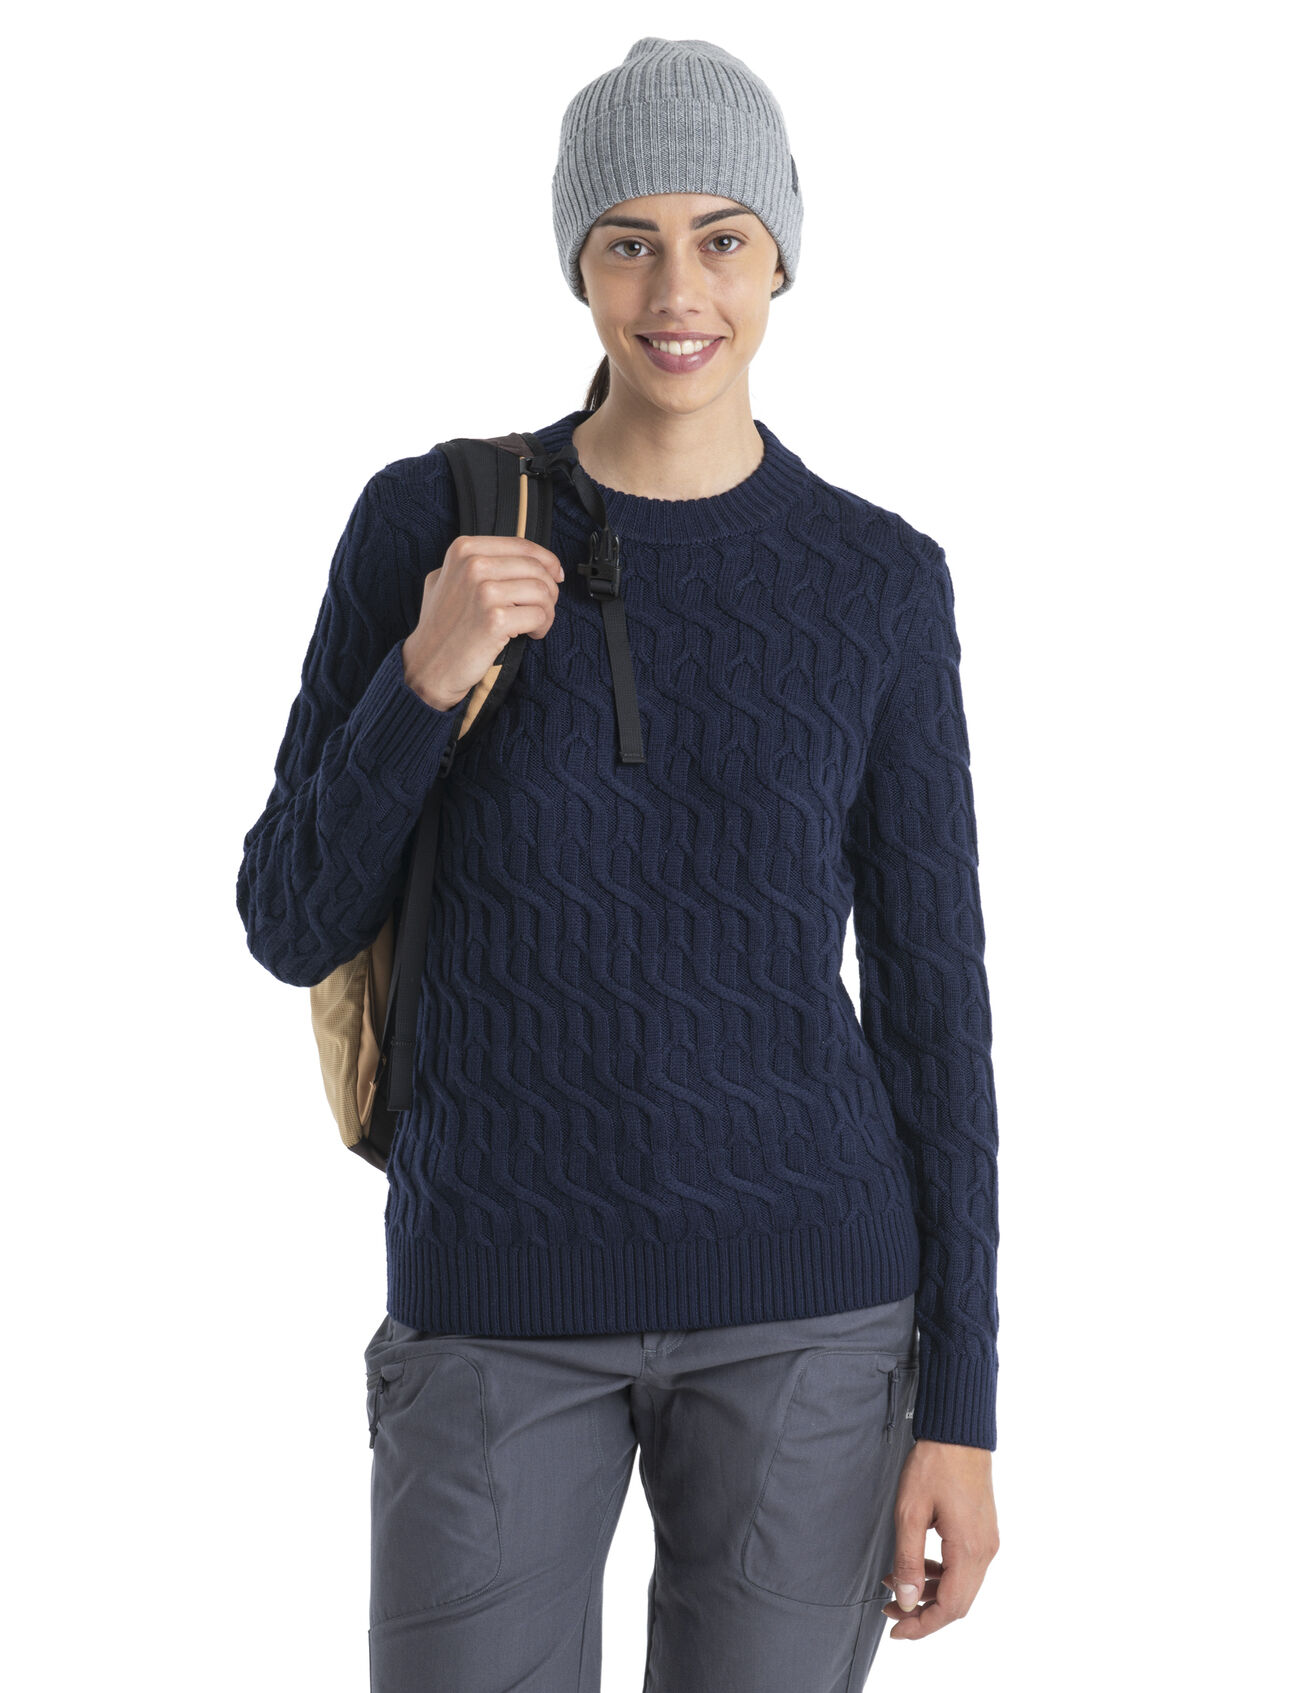 United By Blue Recycled Wool Cable-Knit Sweater - Men's